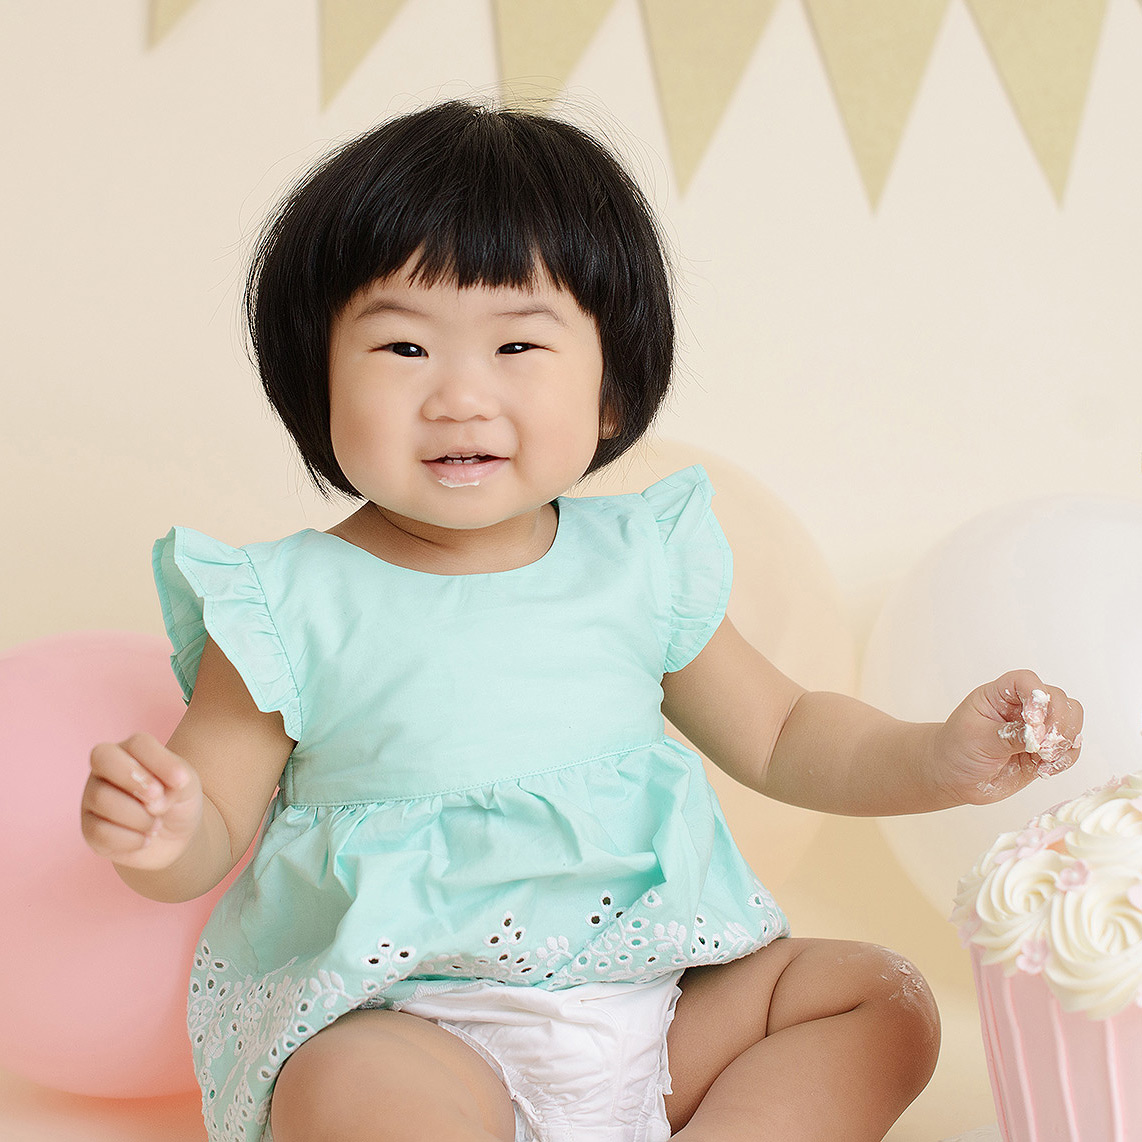 Baby girl with frosting on hands cake smash with balloon background